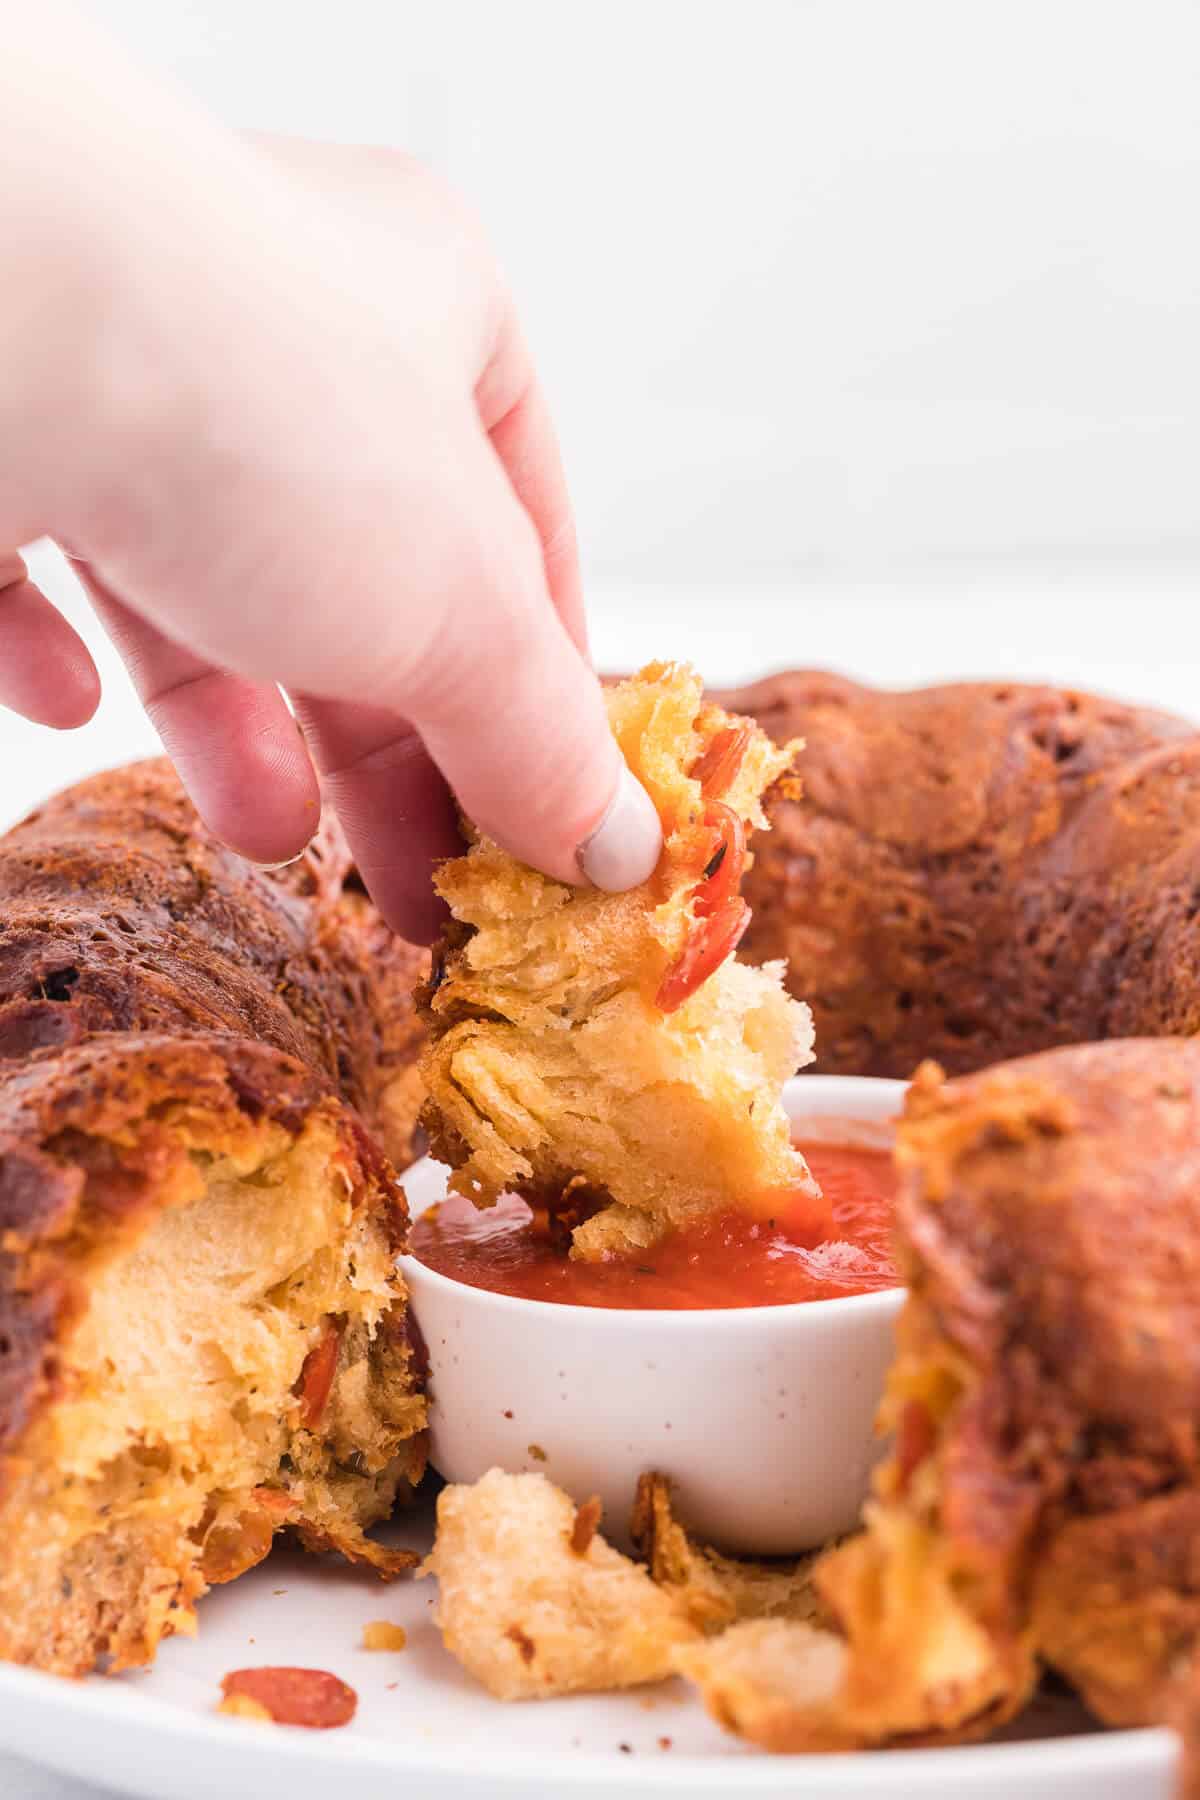 Pizza Monkey Bread Recipe - This pull apart game day recipe is simple to make in a bundt pan. Crescent roll dough, pepperoni and mozzarella cheese are combined to make the most delicious Italian-style appetizer. Serve with some pizza sauce for easy dipping!